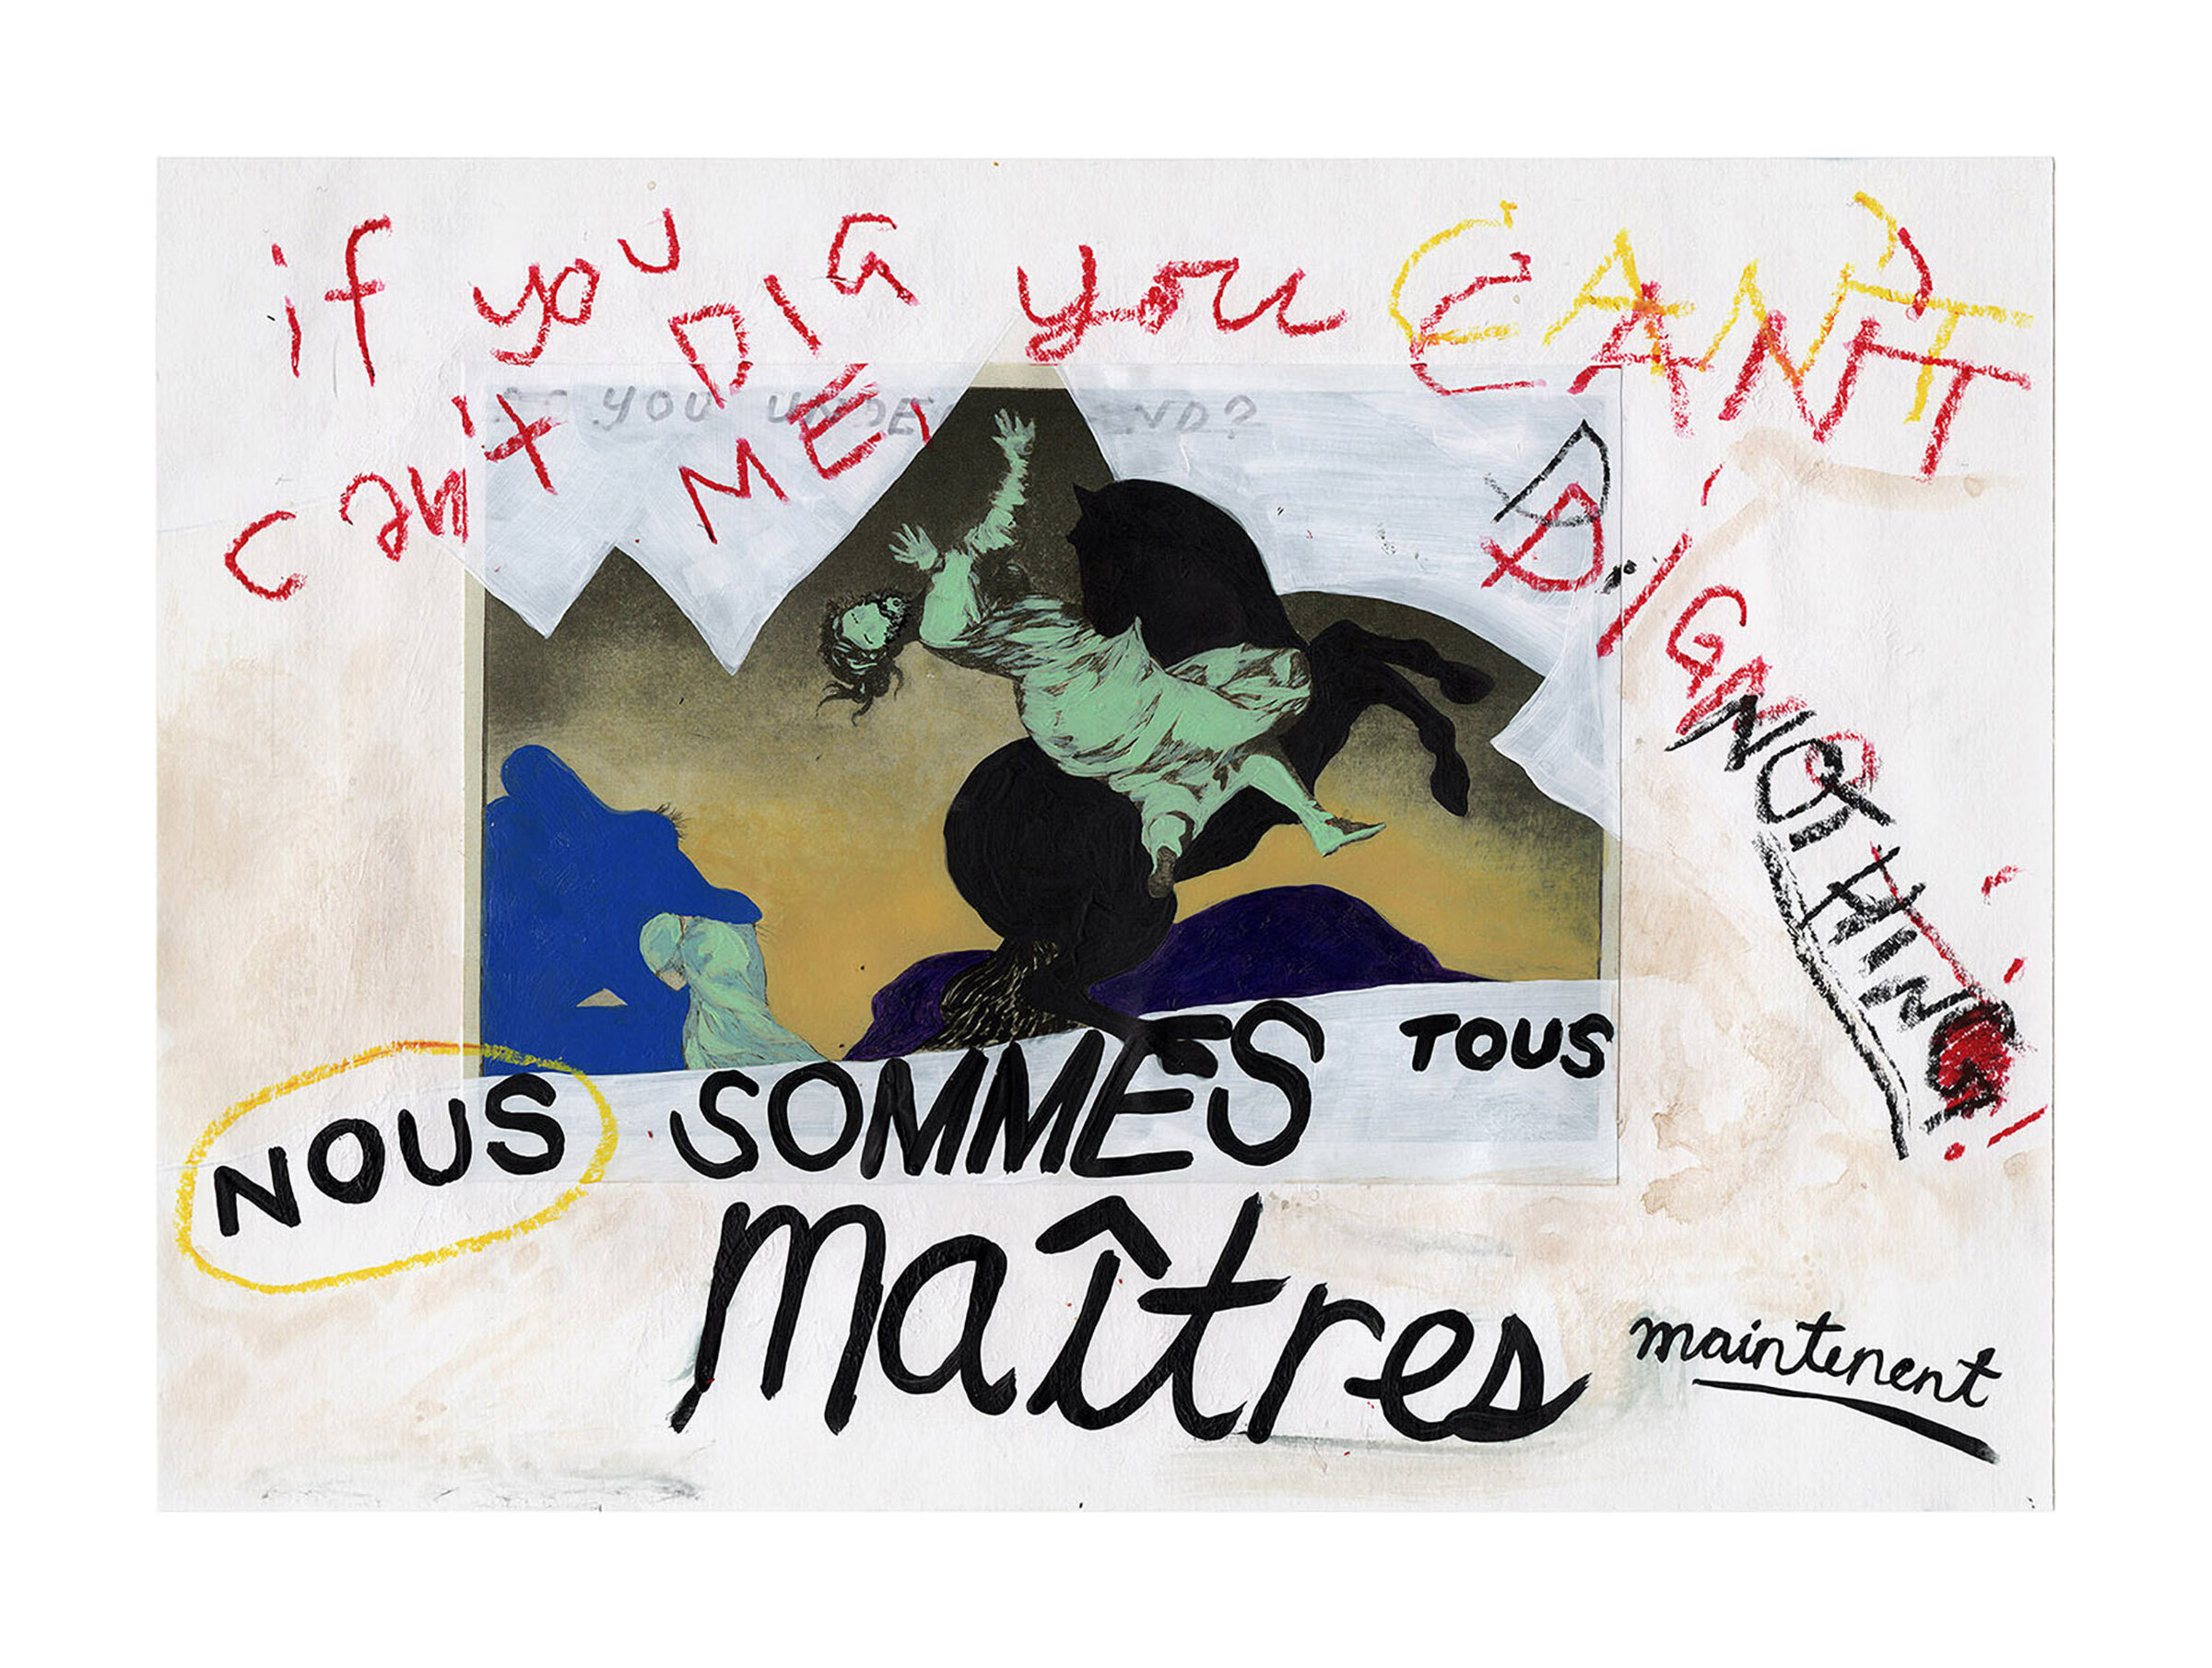   Nous sommes tous maitres maintenent  Acrylic, crayon, ink and collage on paper 10 x 14 inches 2019 